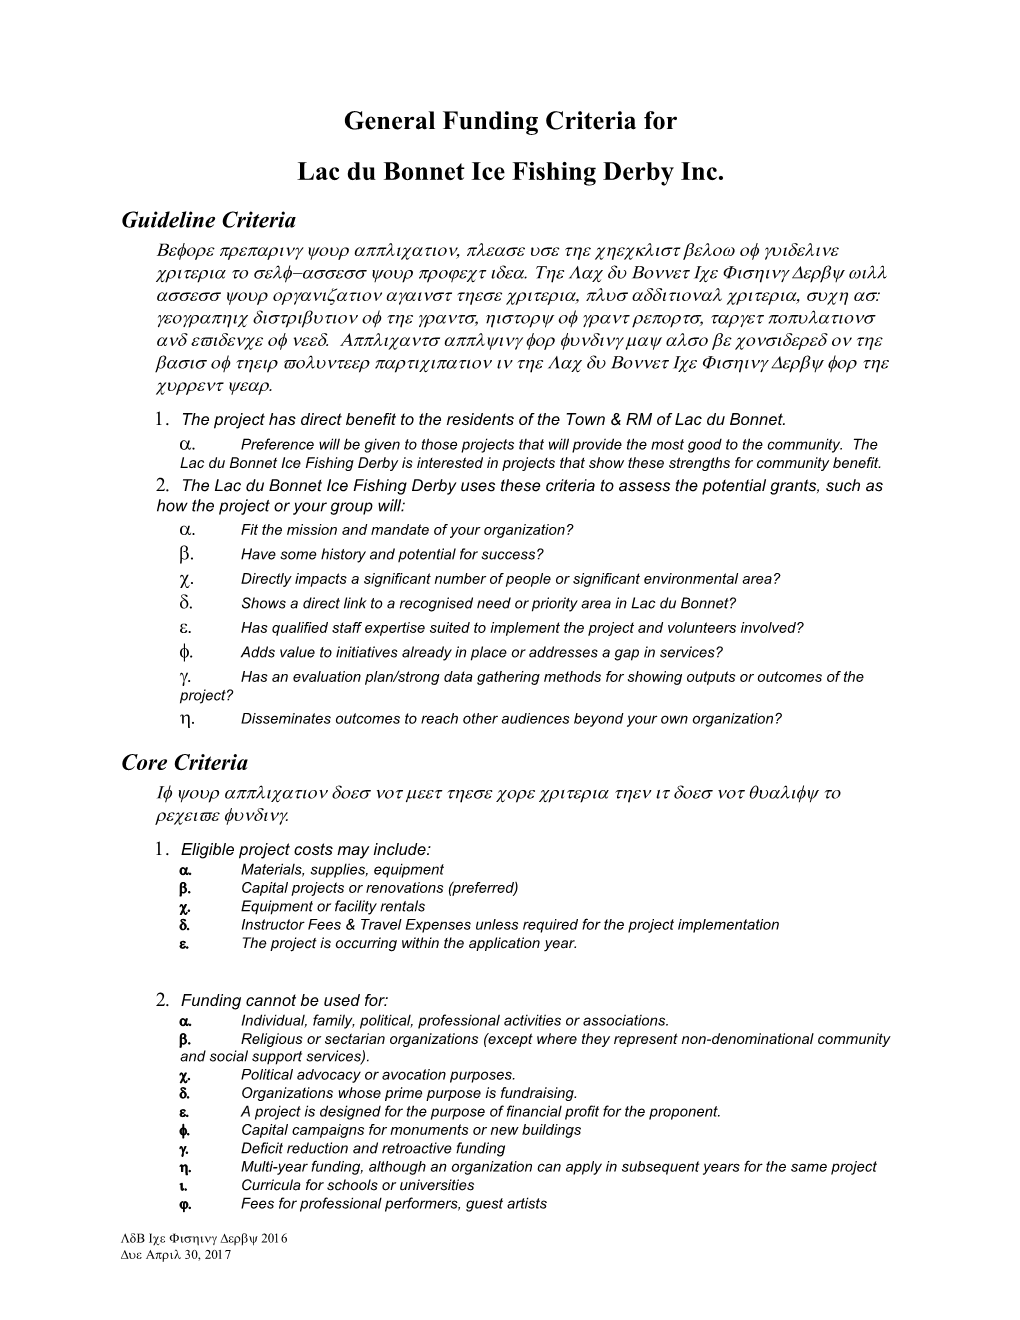 General Funding Criteria for Lac Du Bonnet Ice Fishing Derby Inc